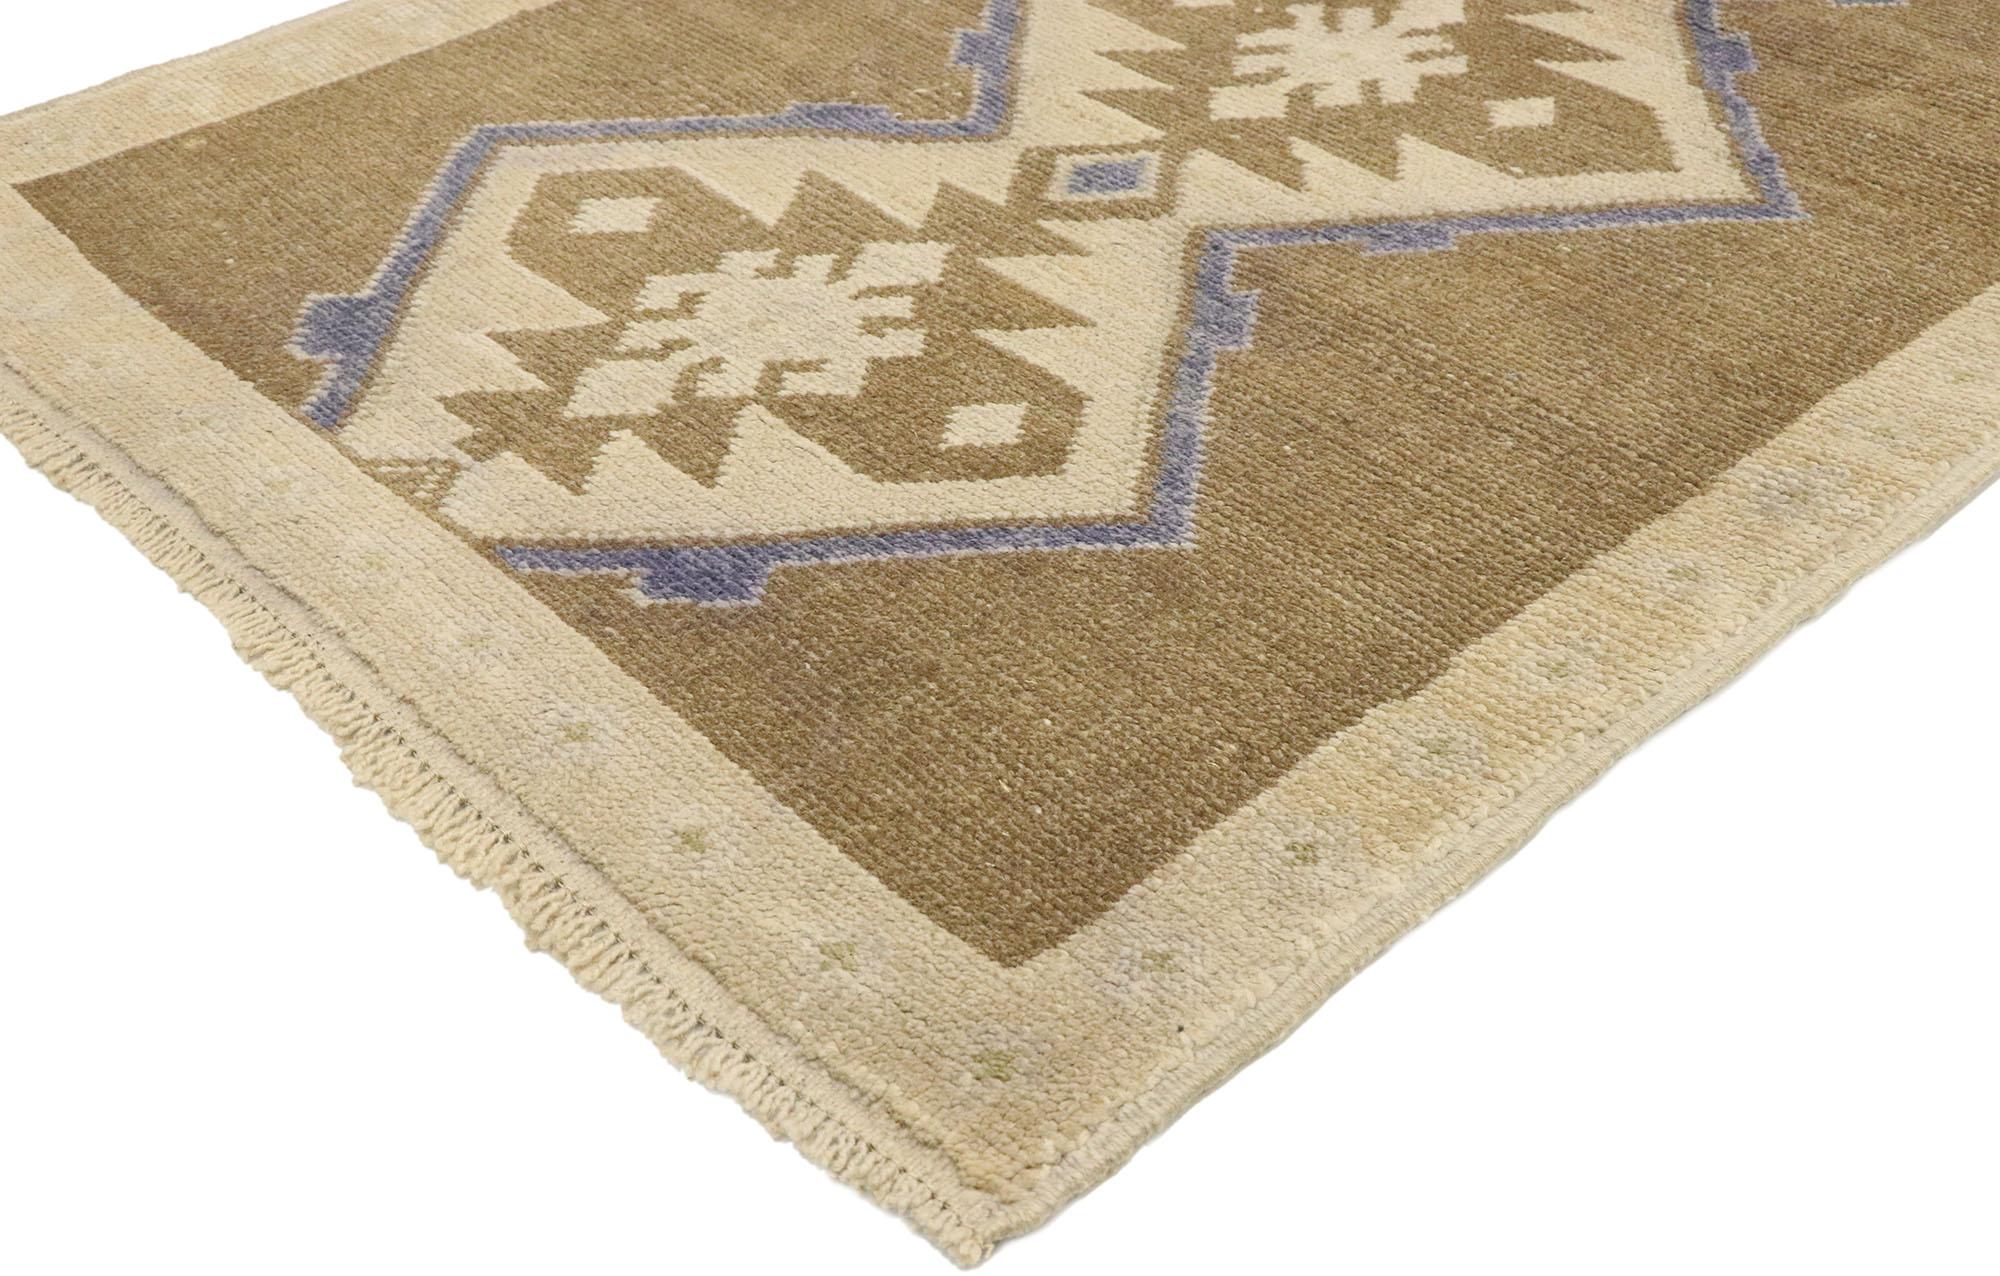 ​52088 Vintage Turkish Oushak Rug with Modern Bohemian Style 02'11 x 05'05. Warm and inviting with a splash of painted color, this hand-knotted wool vintage Turkish Oushak rug beautifully embodies a modern bohemian style. The abrashed tan and taupe